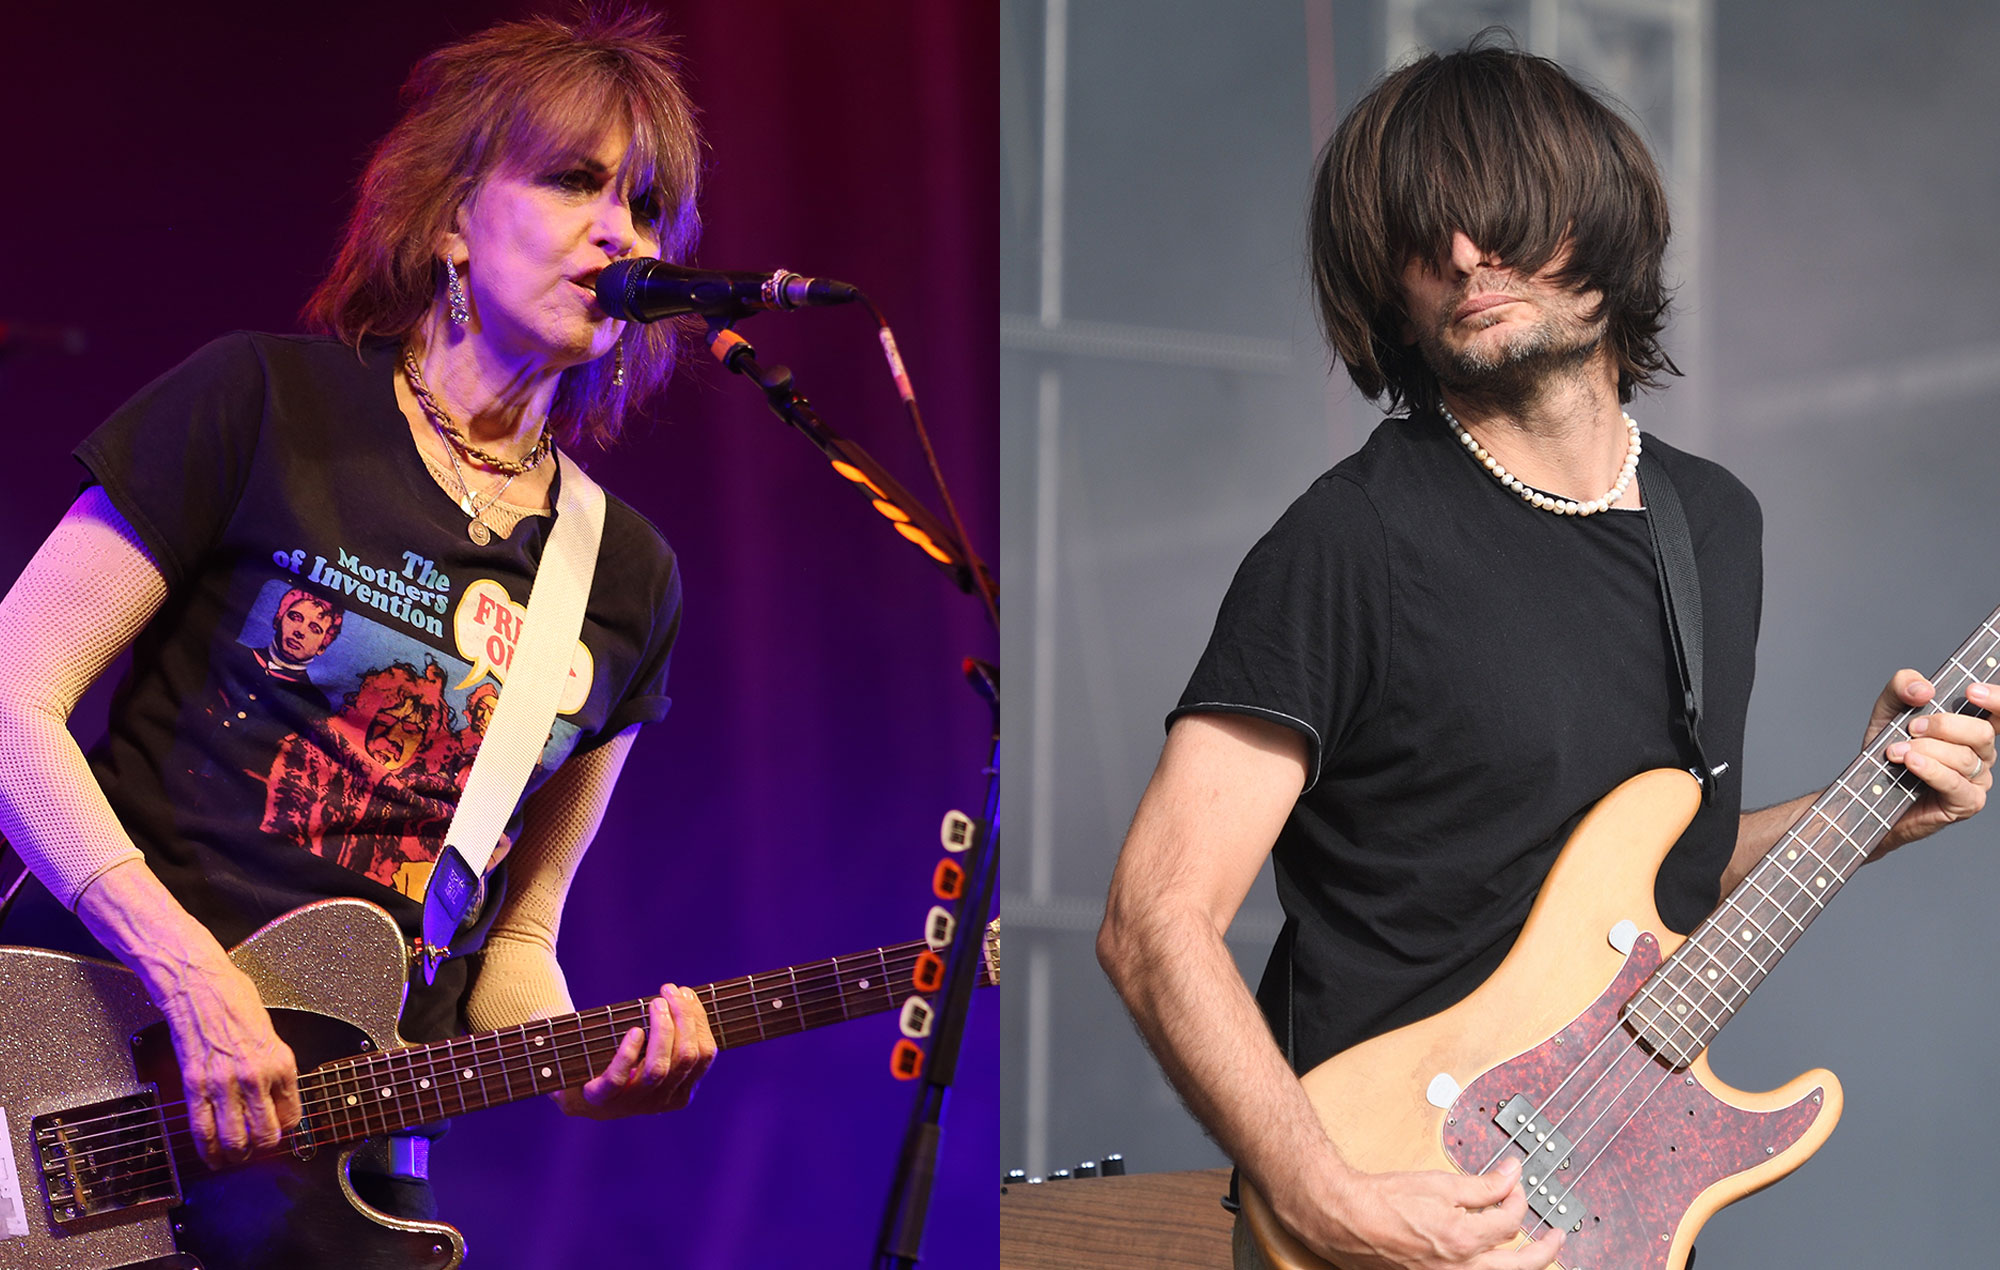 The Pretenders and Jonny Greenwood collaborate on new song ‘I Think About You Daily’